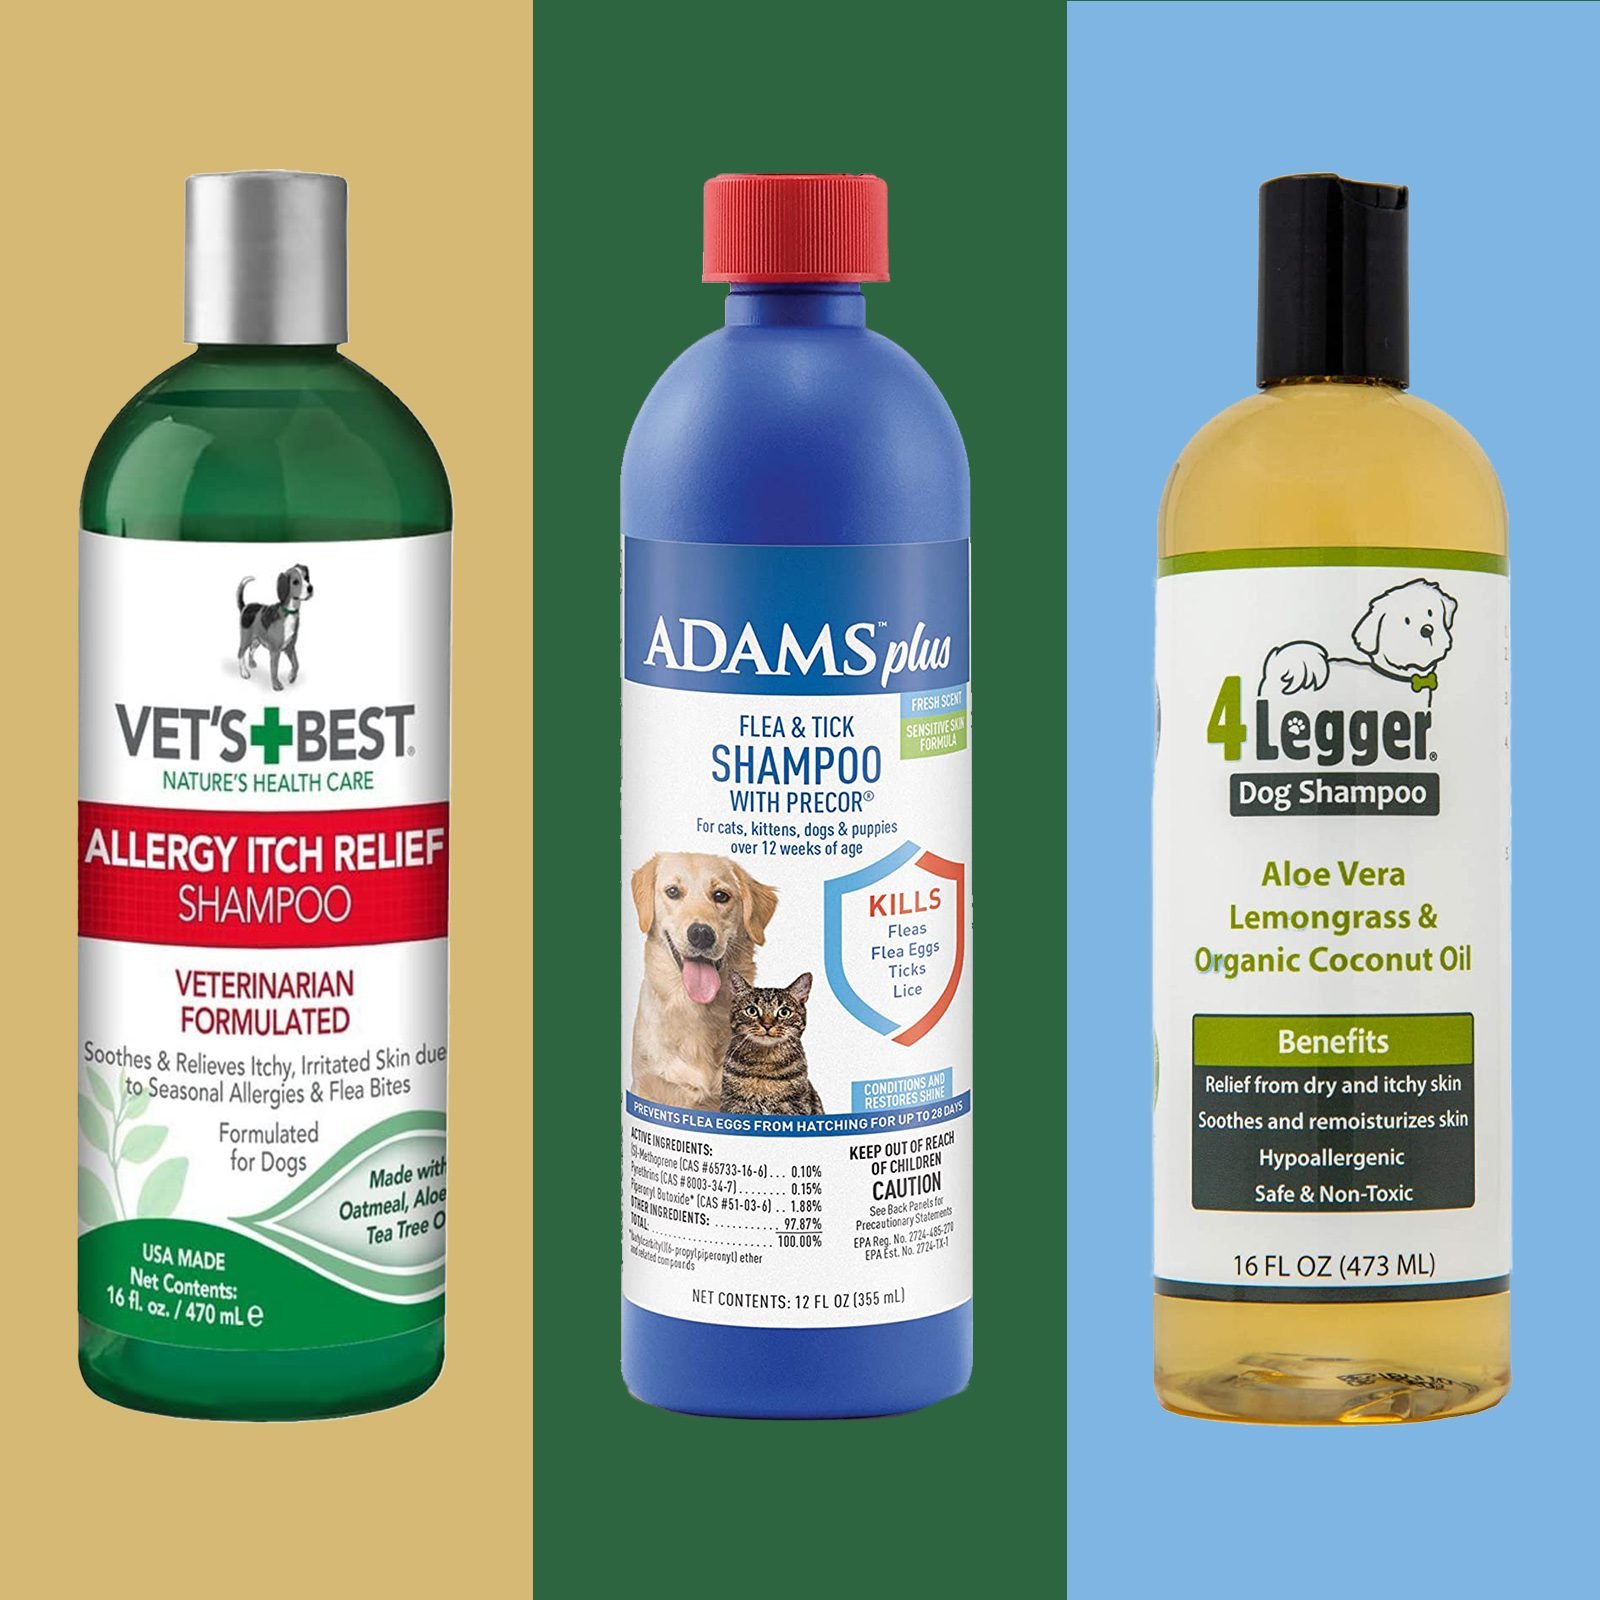 What Can I Wash My Dog With If I Dont Have Shampoo? Creative Alternatives!